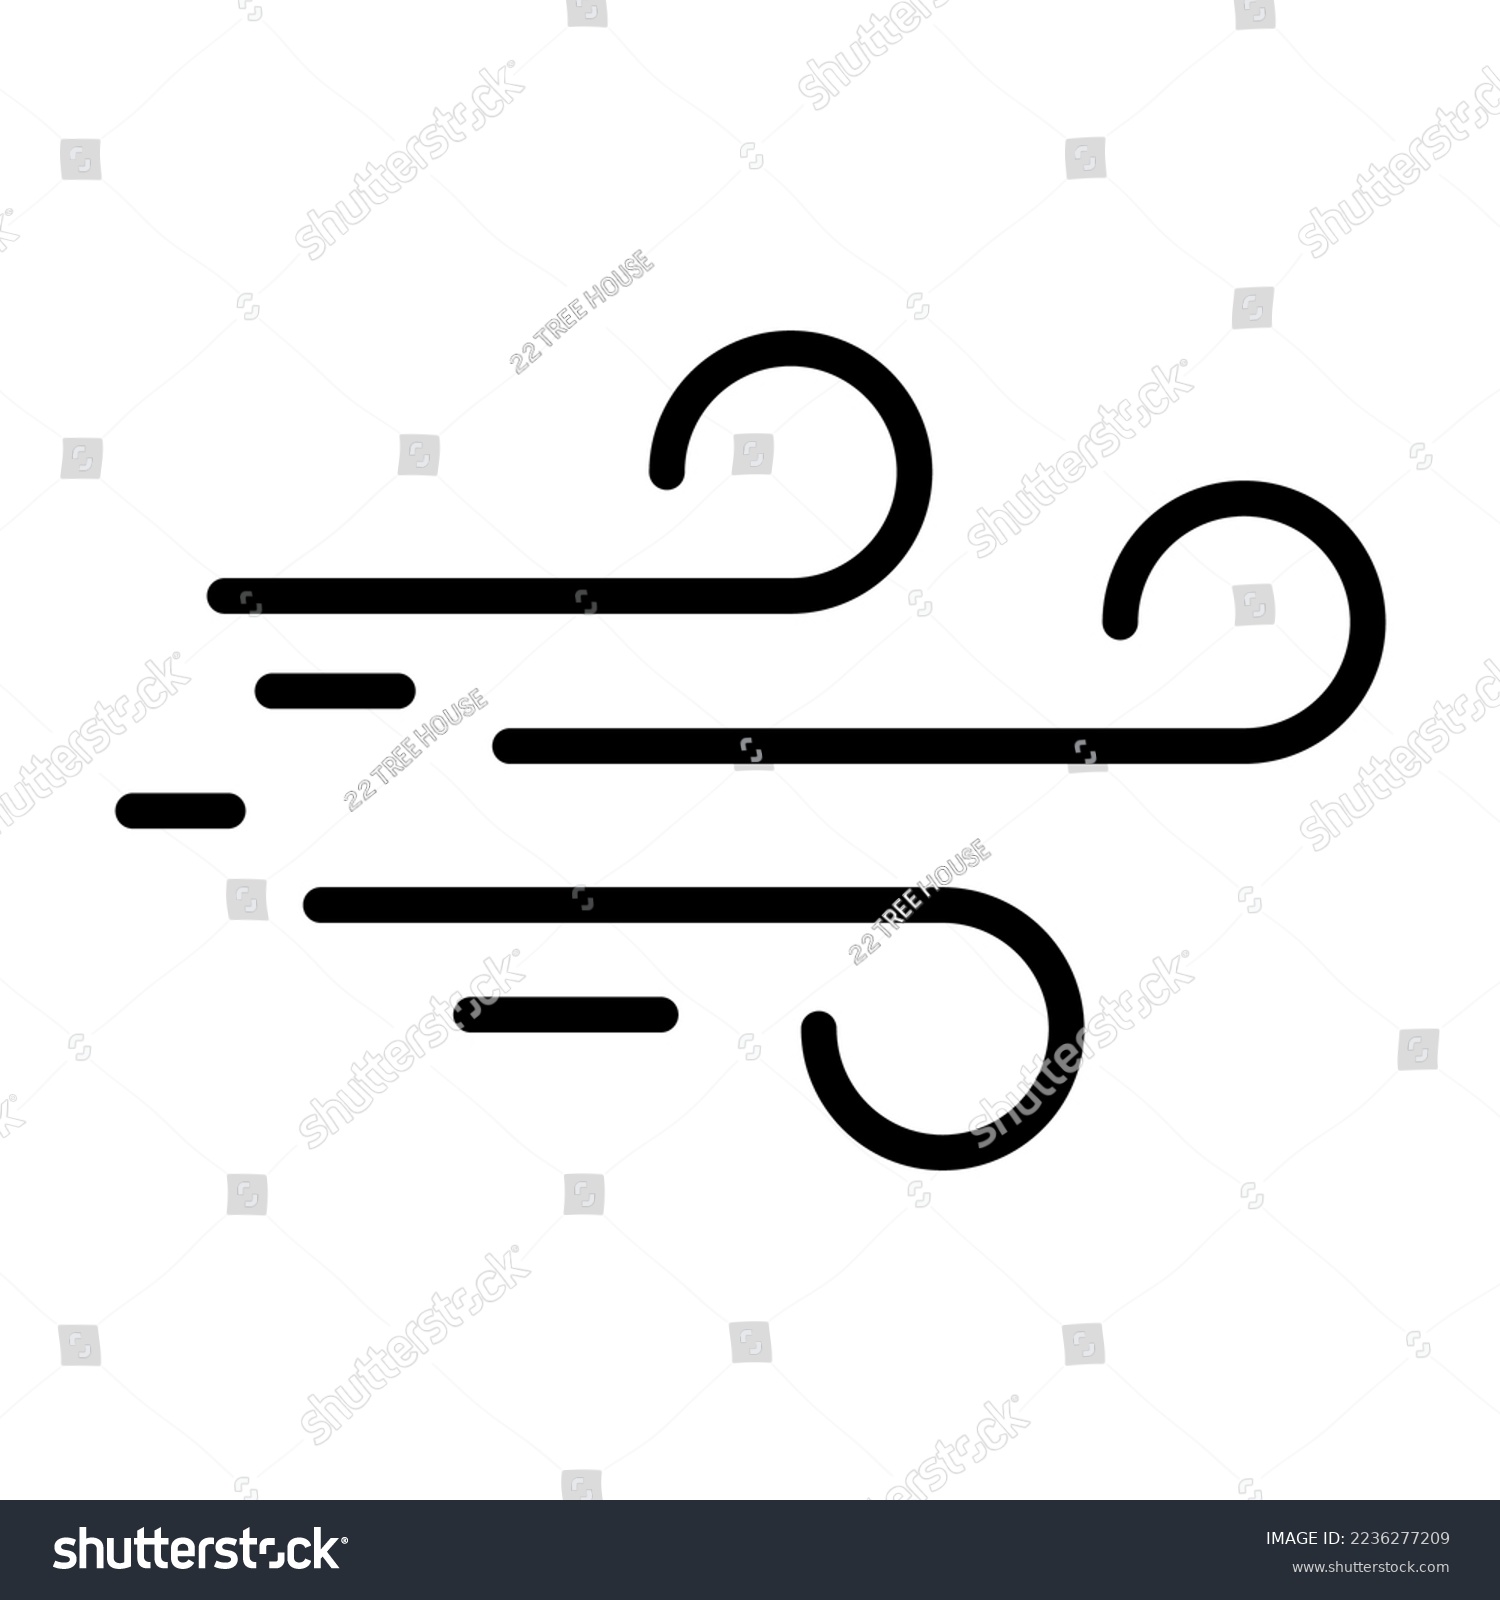 SVG of Wind icon Vector isolated on background. air line style design for infographic banner and website design. windy symbols logo vector illustration. svg